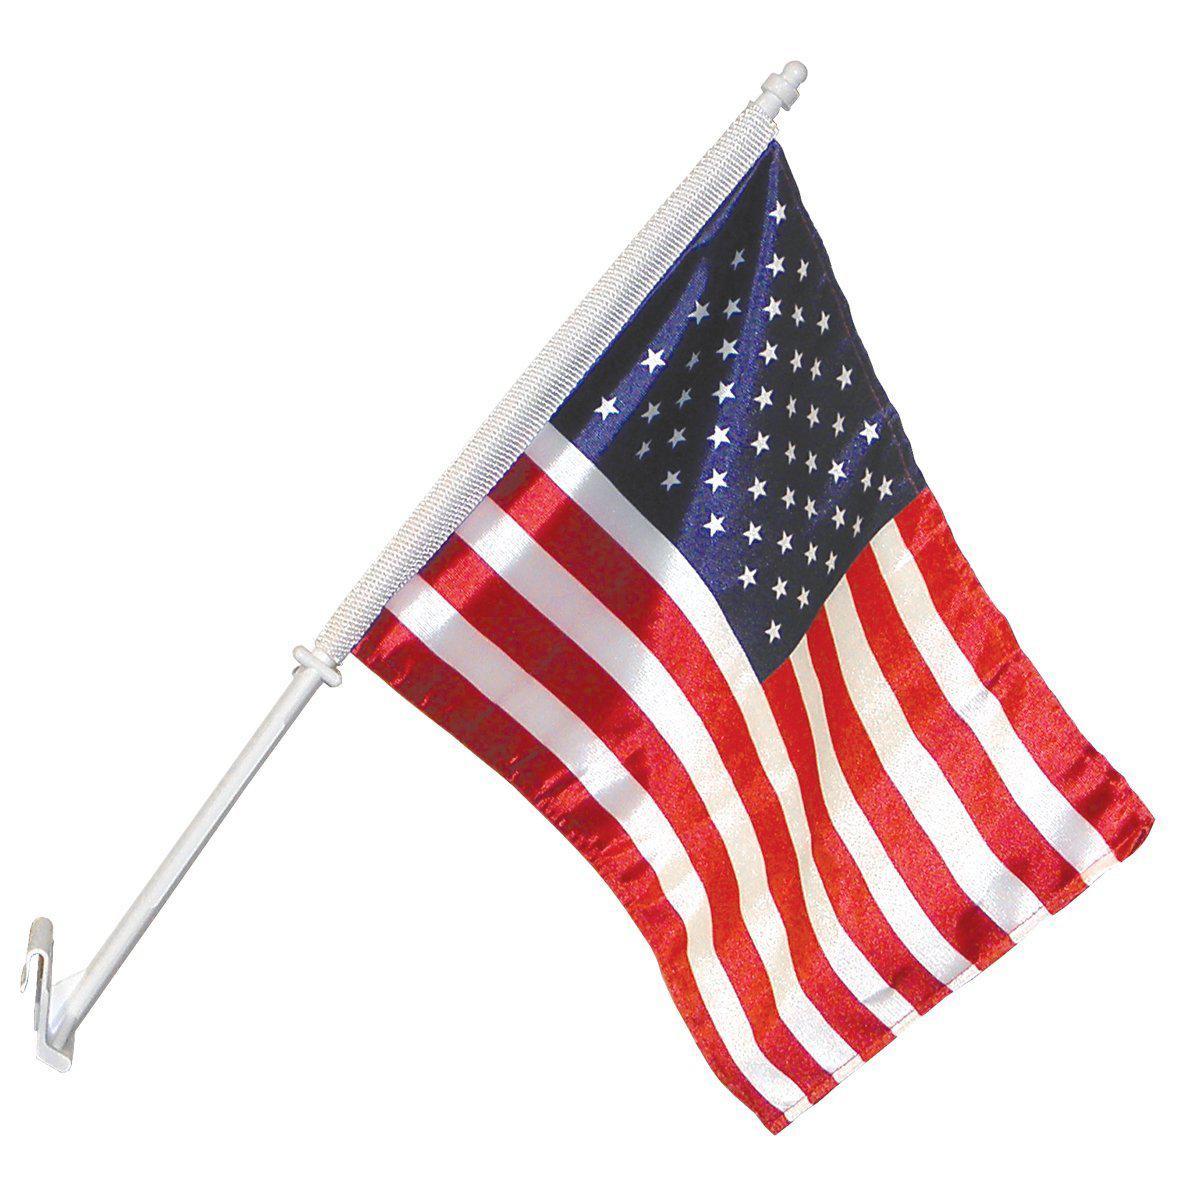 U.S. Car Flags are made tough to withstand highway speeds.